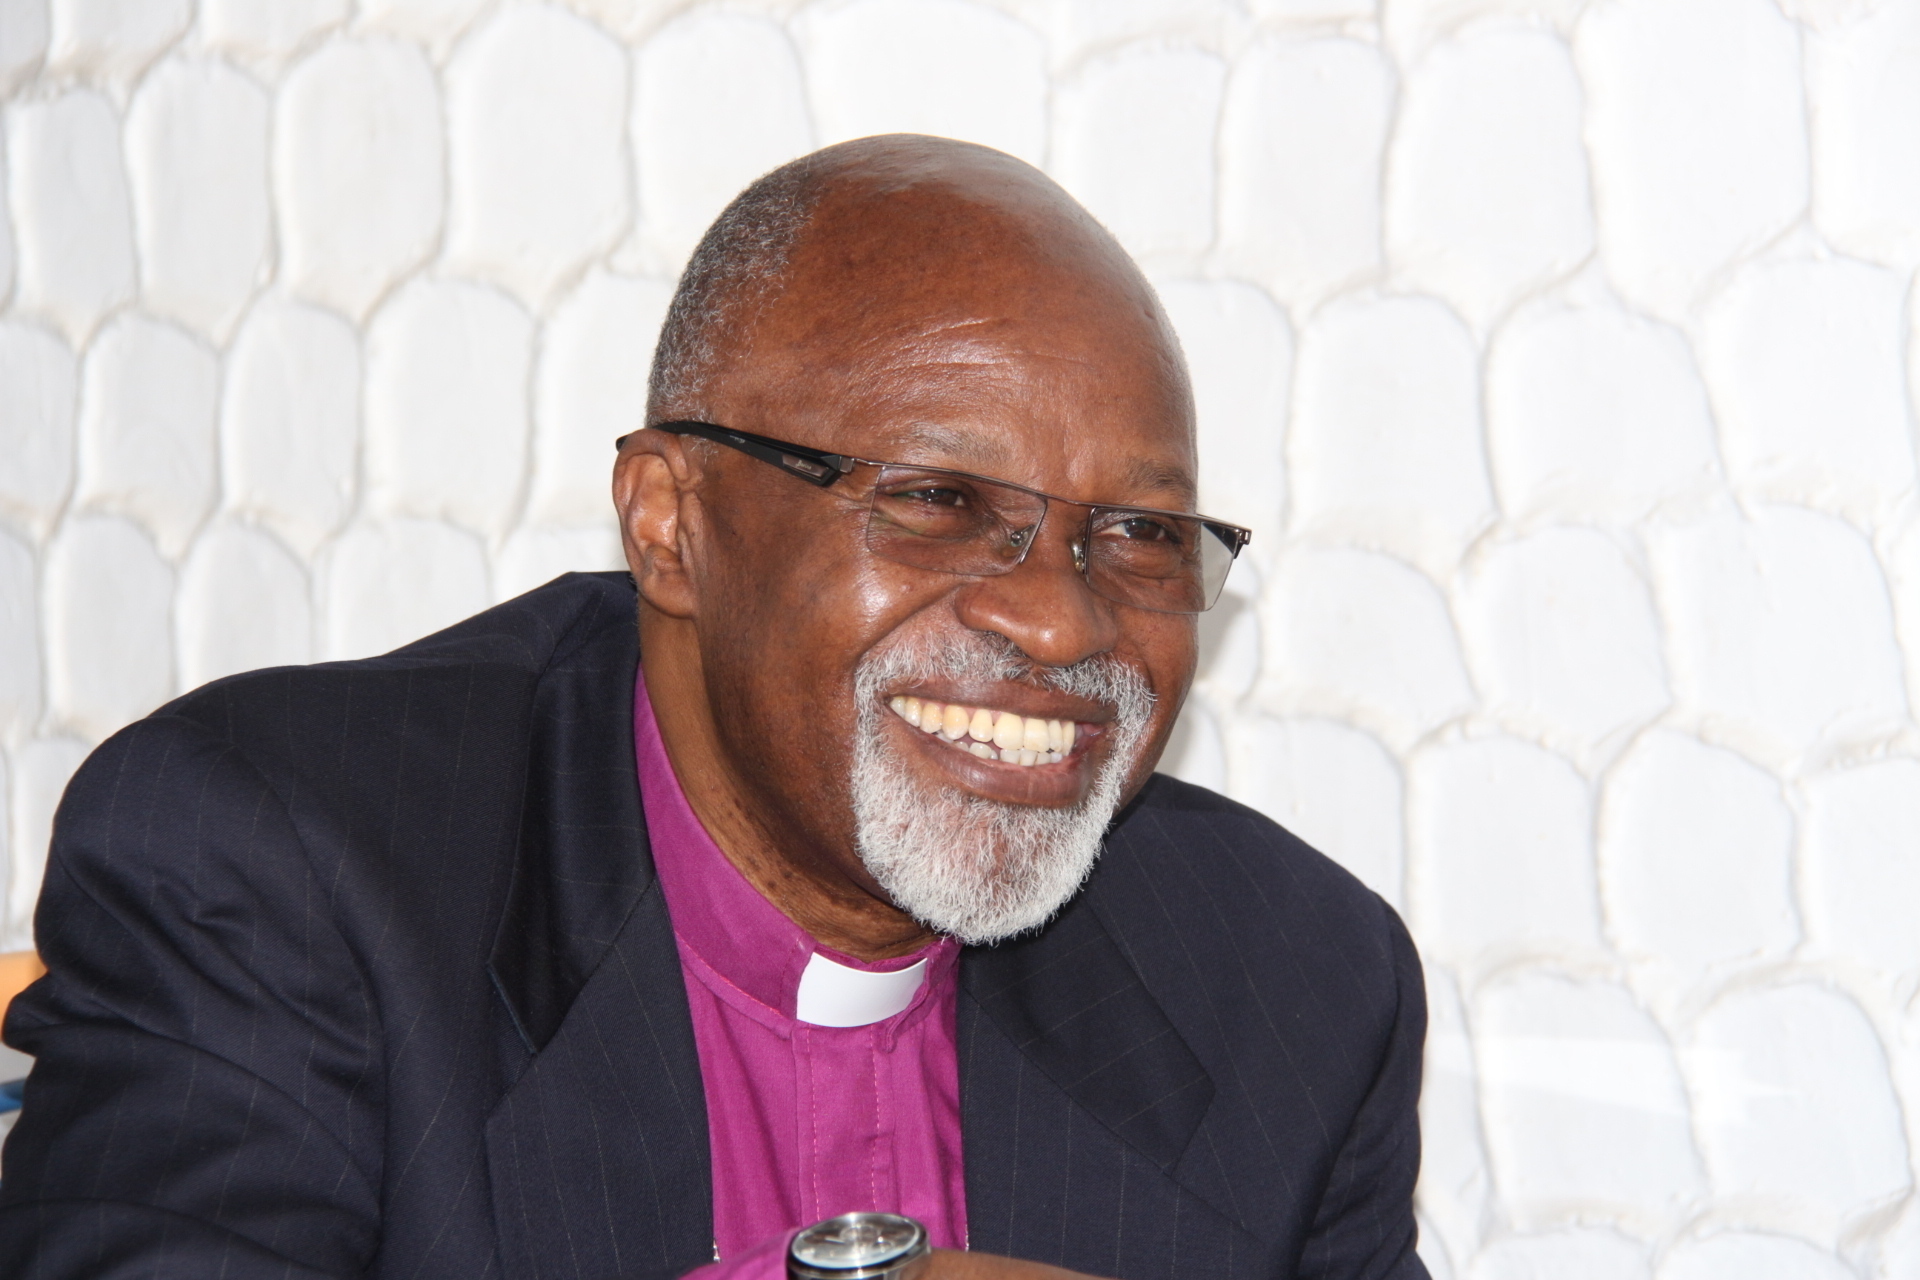 A man wearing a suit and bishop's collar smiles and looks to the side